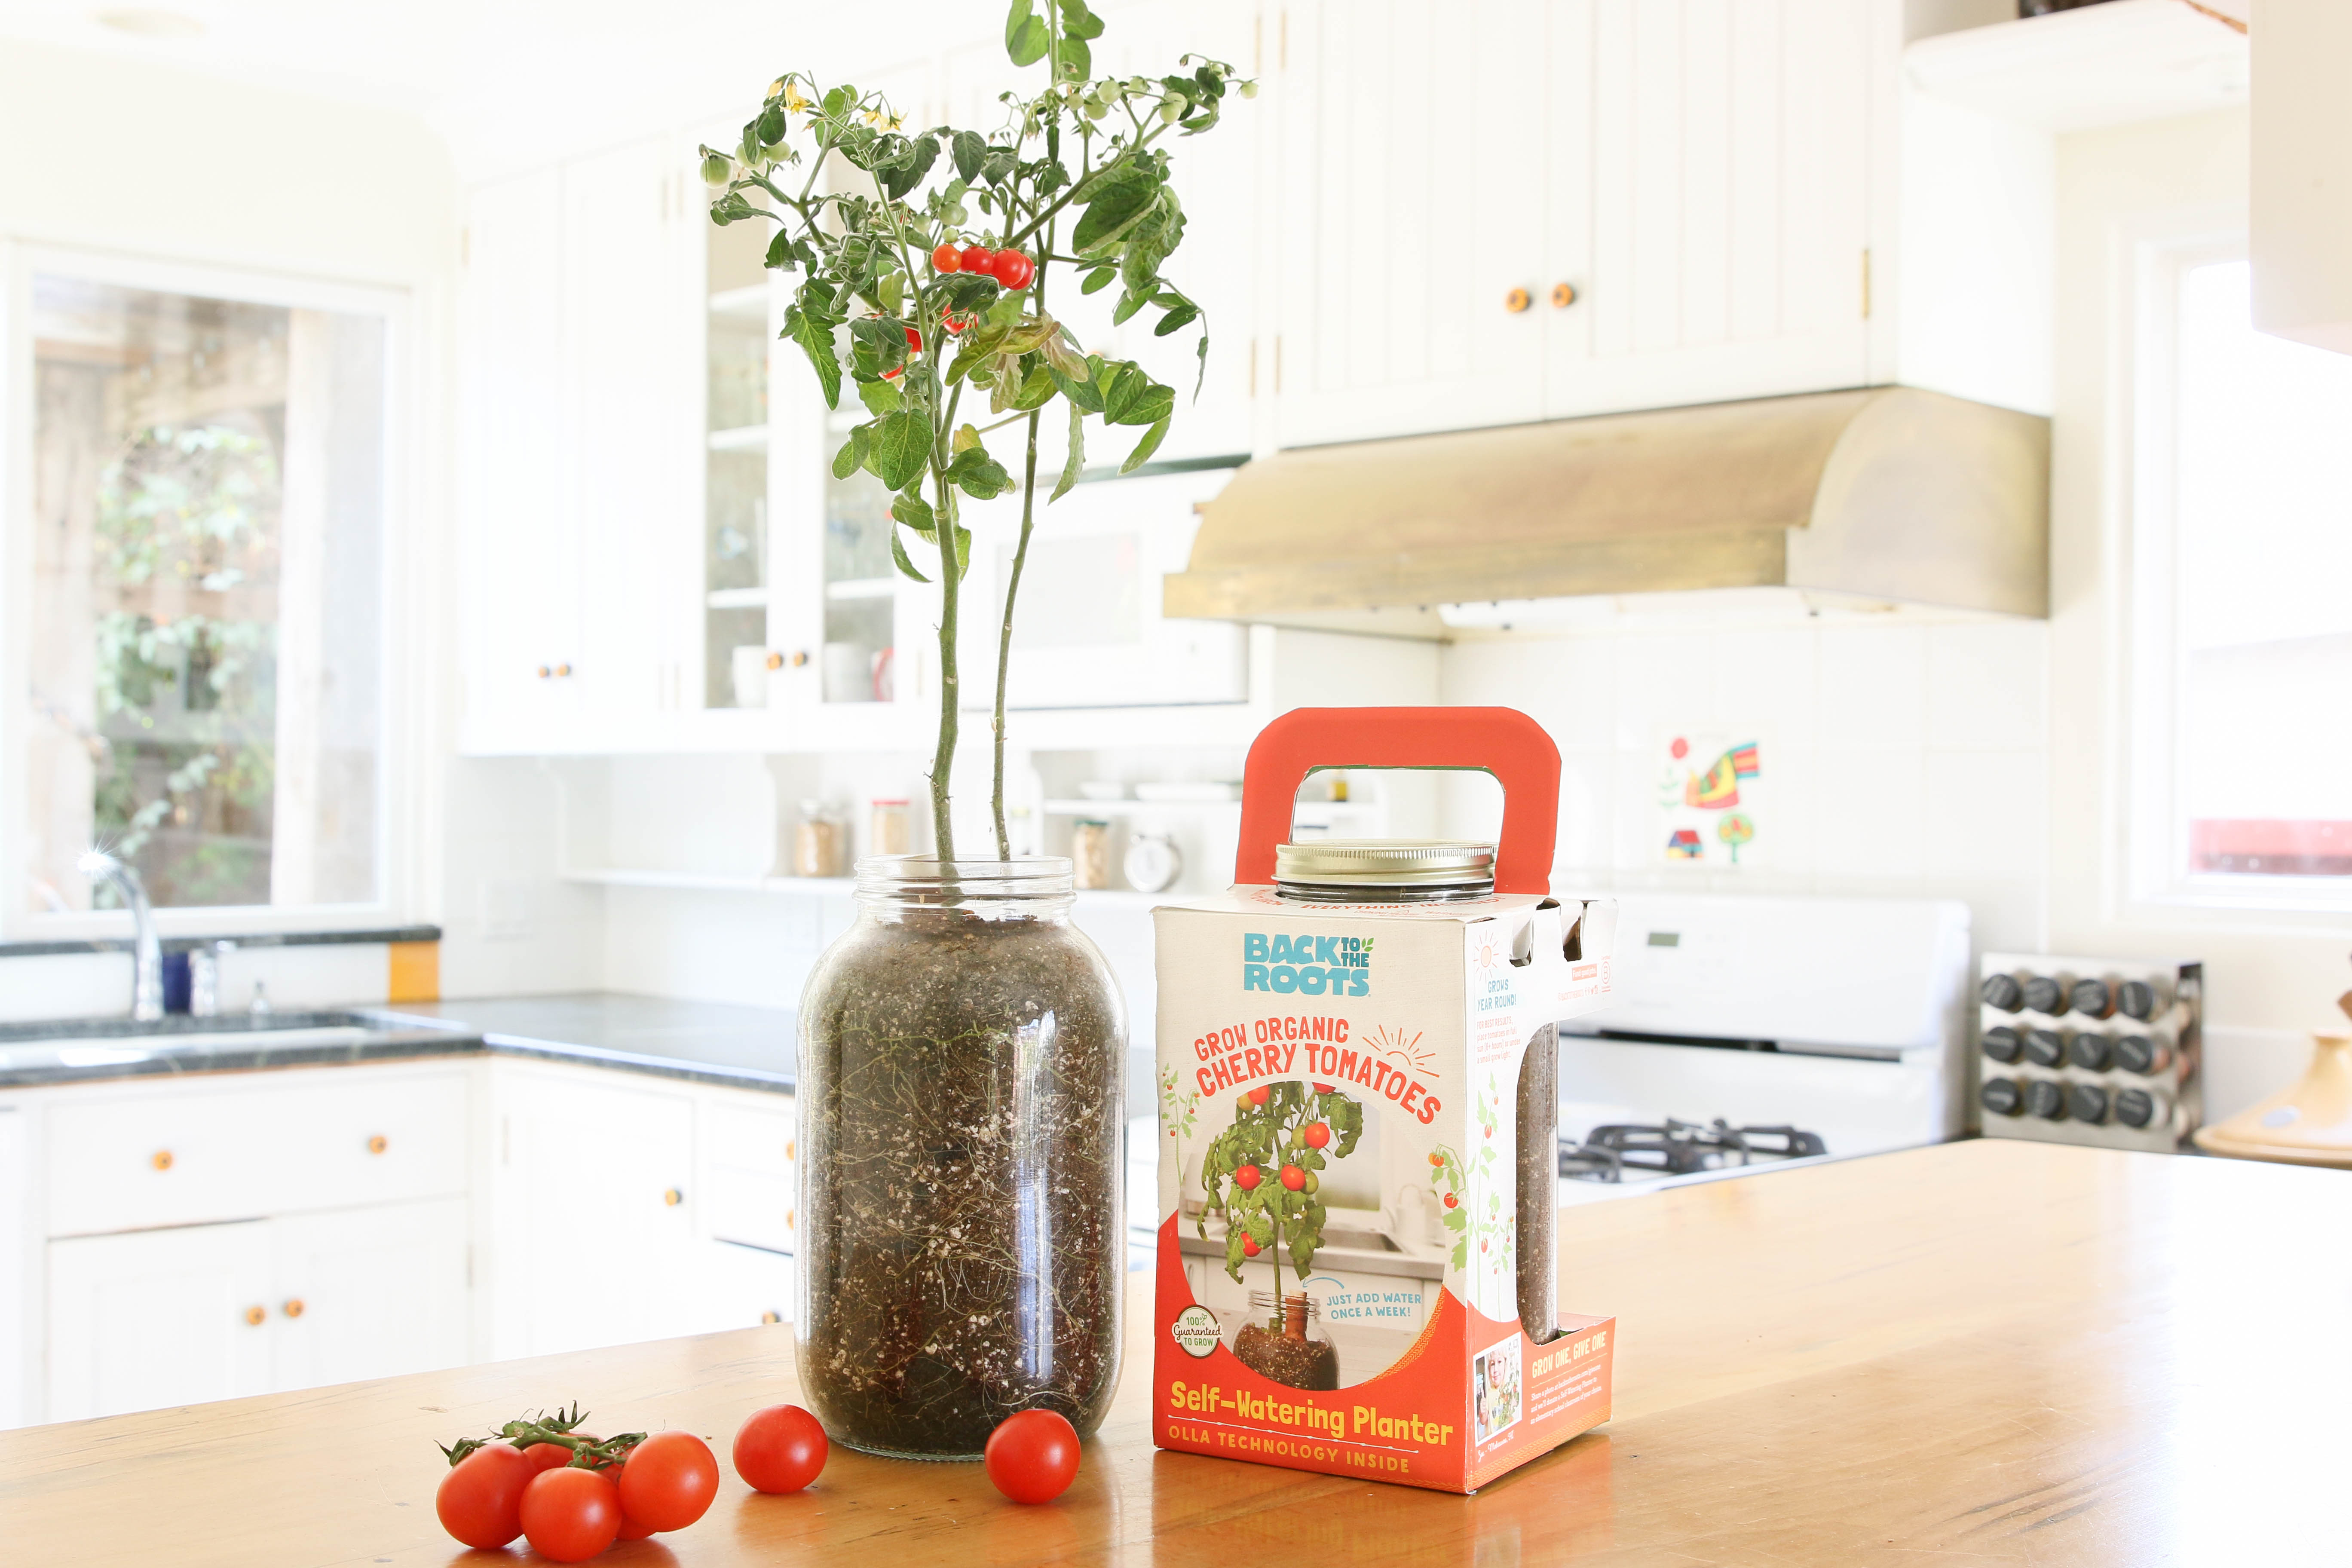 Back to the Roots Windowsill Red Cherry Tomato Planter, Grow Kit - image 5 of 10